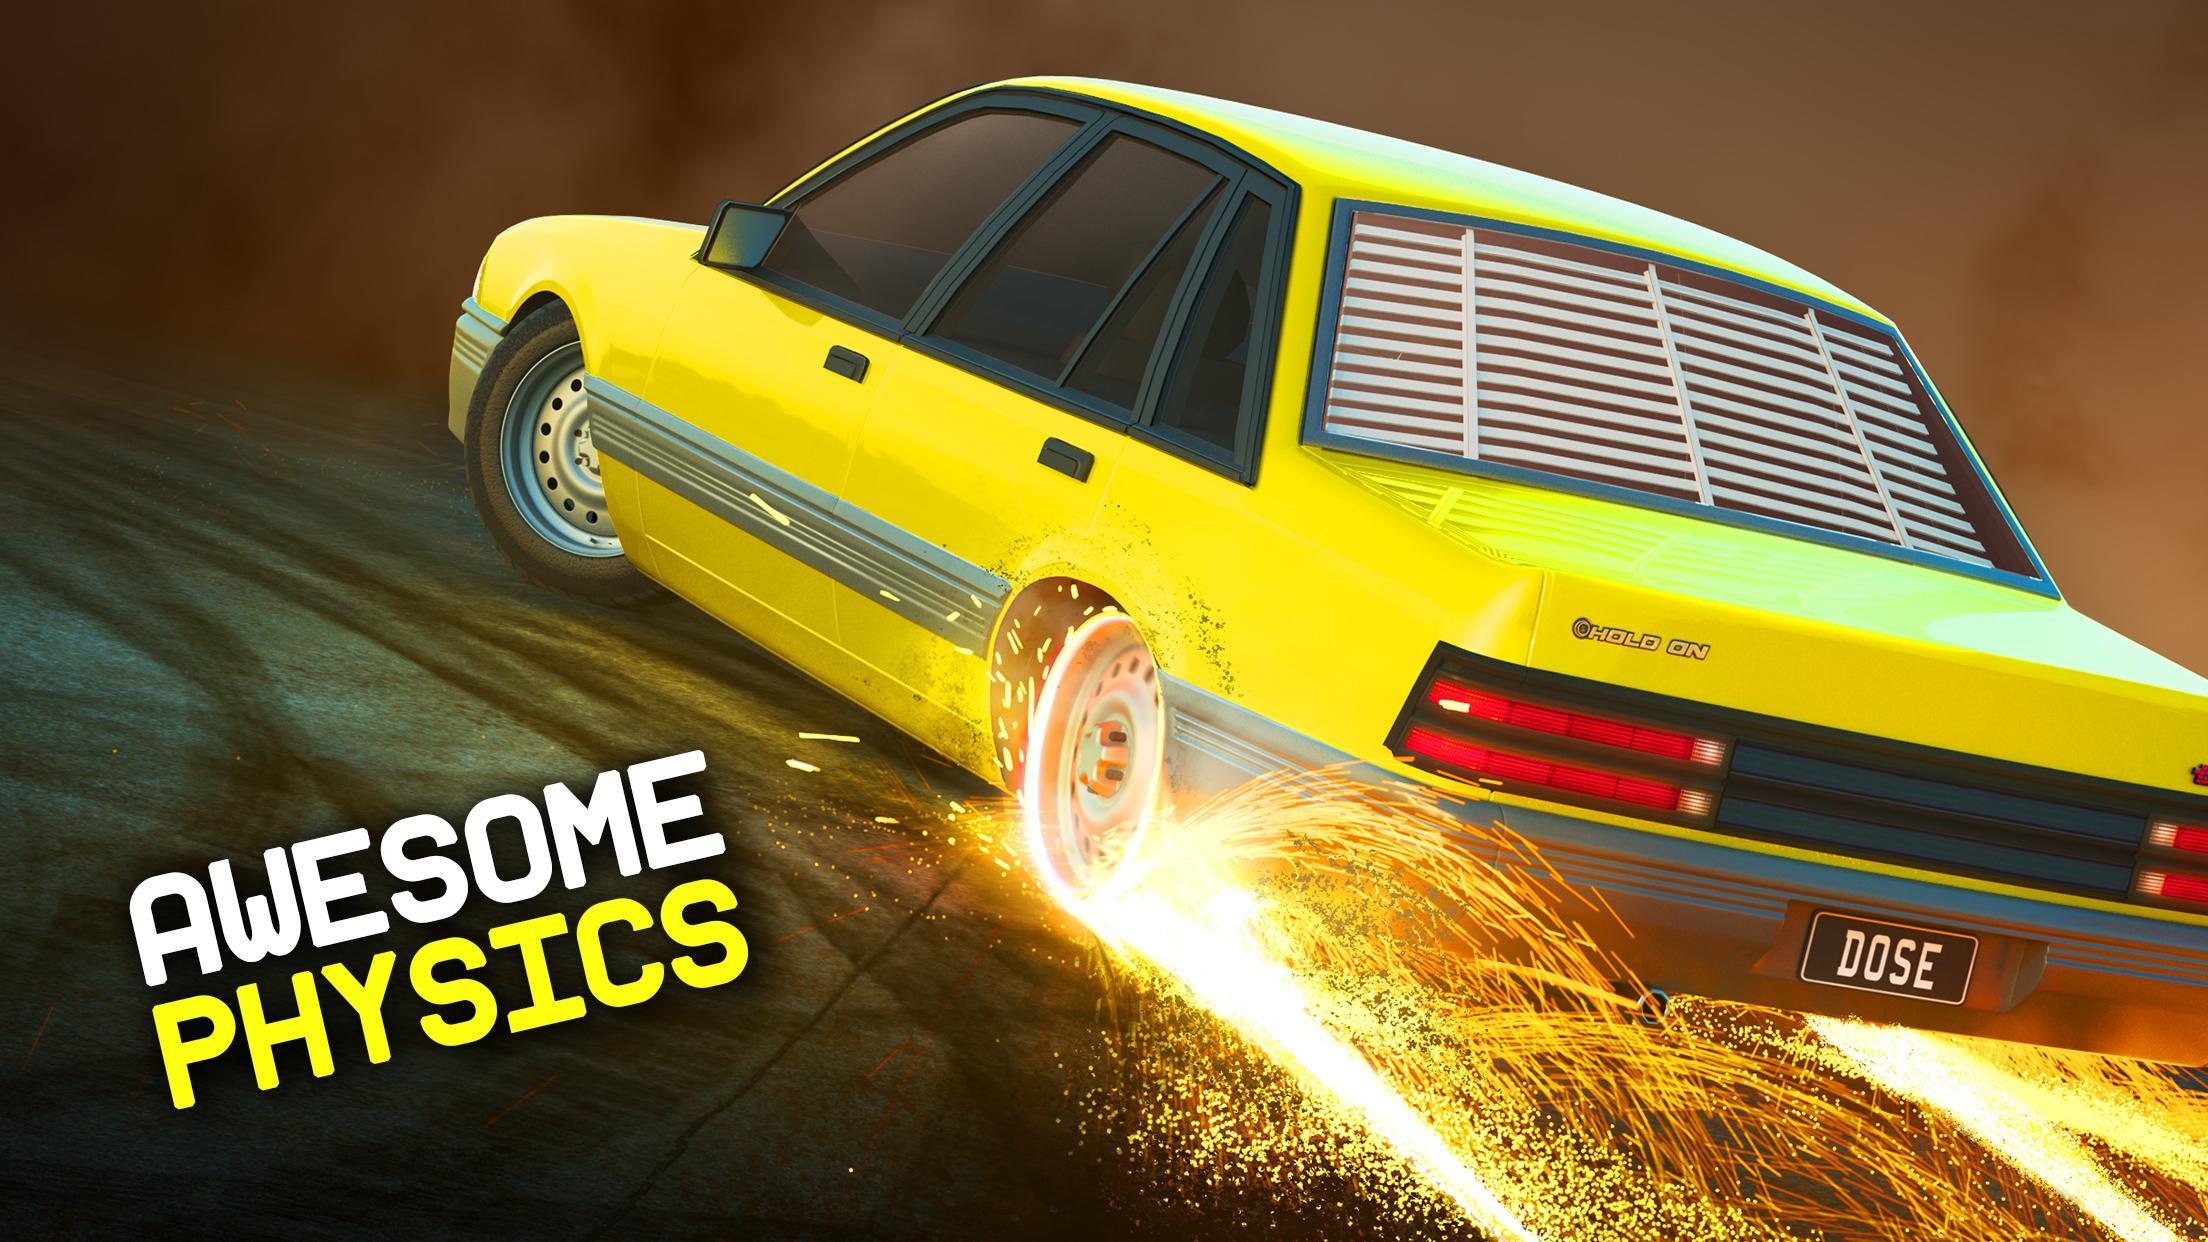 Torque Burnout for Android - APK Download - 